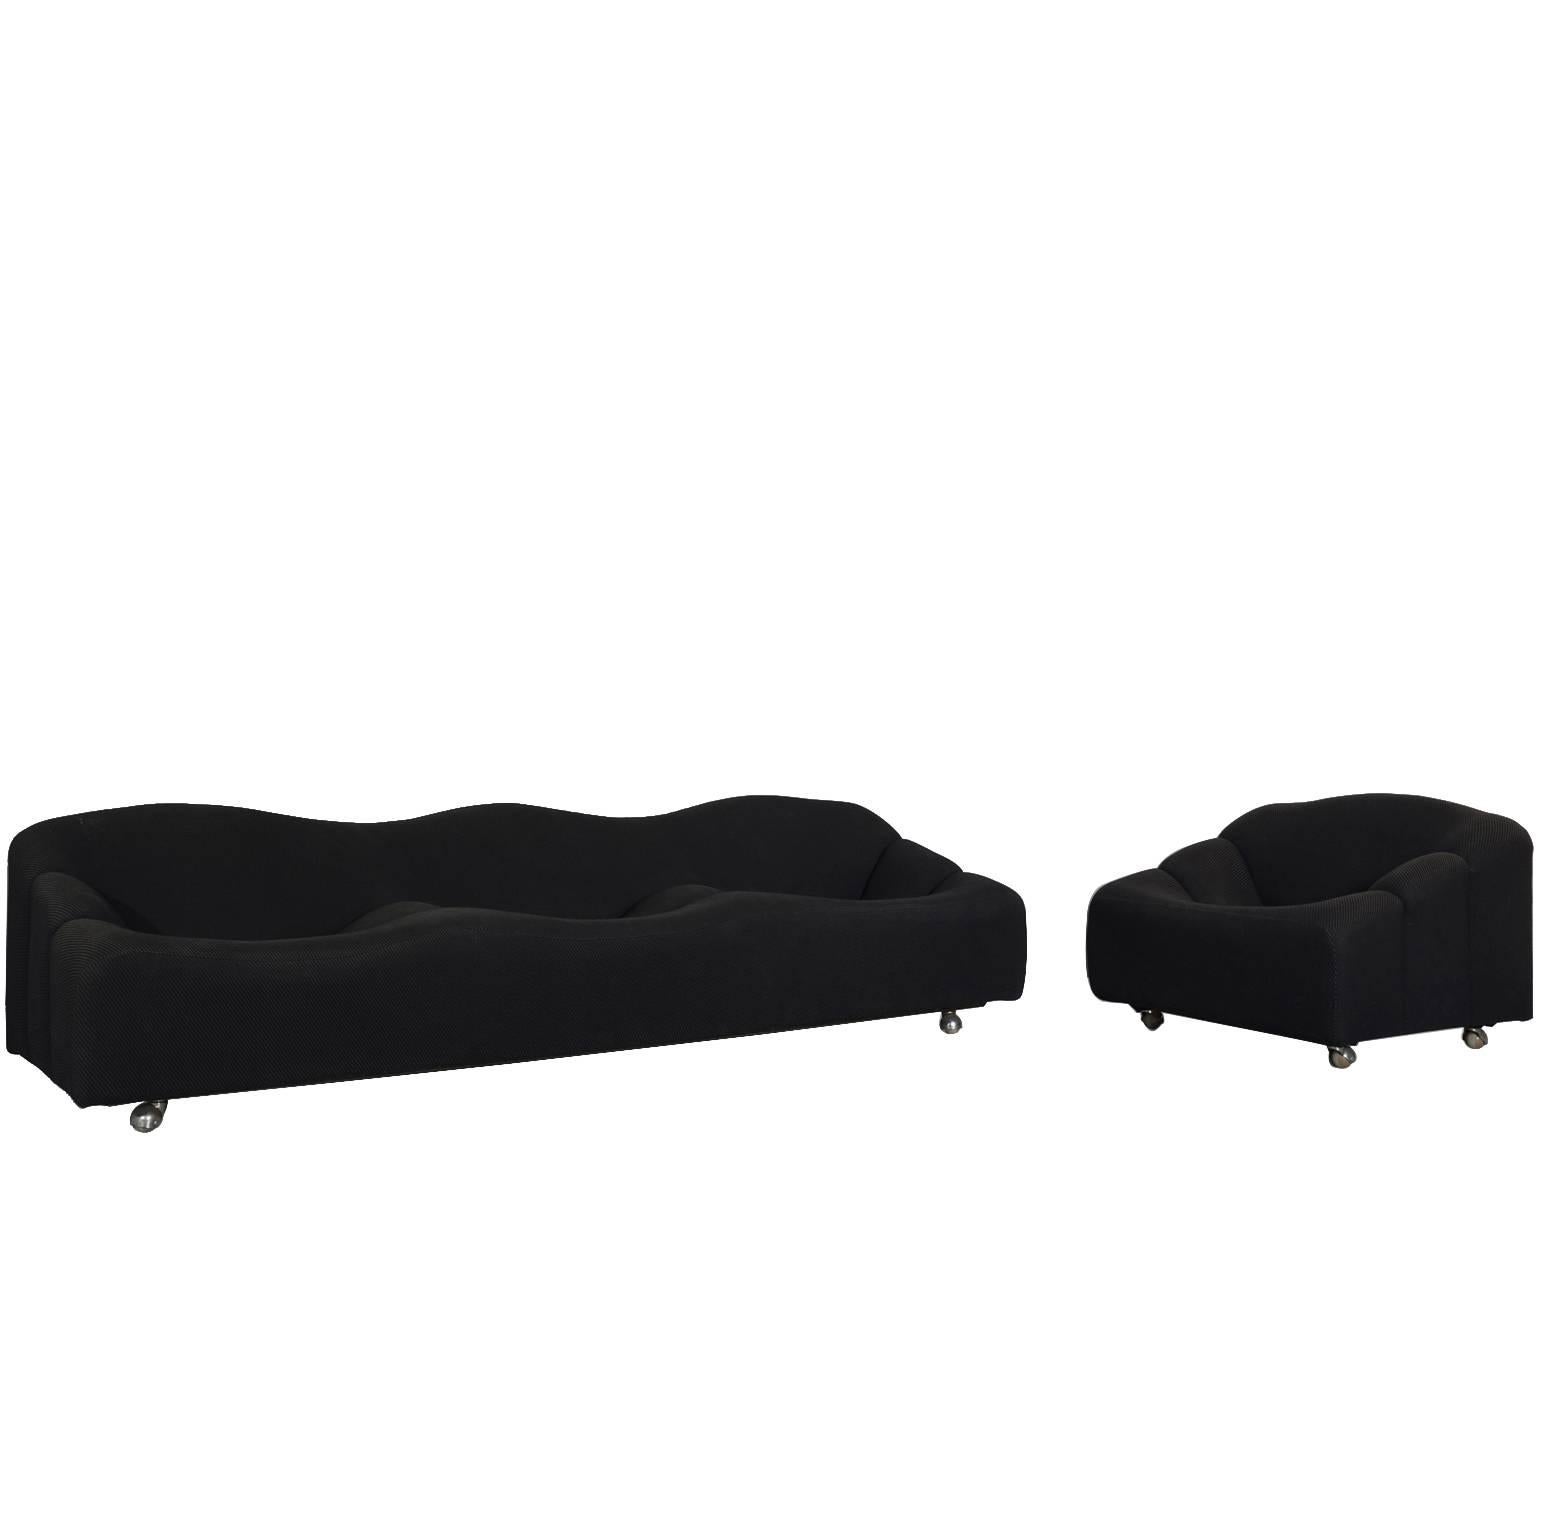 Pierre Paulin Early Edition Sofa and Chair of the ABCD Series for Artifort